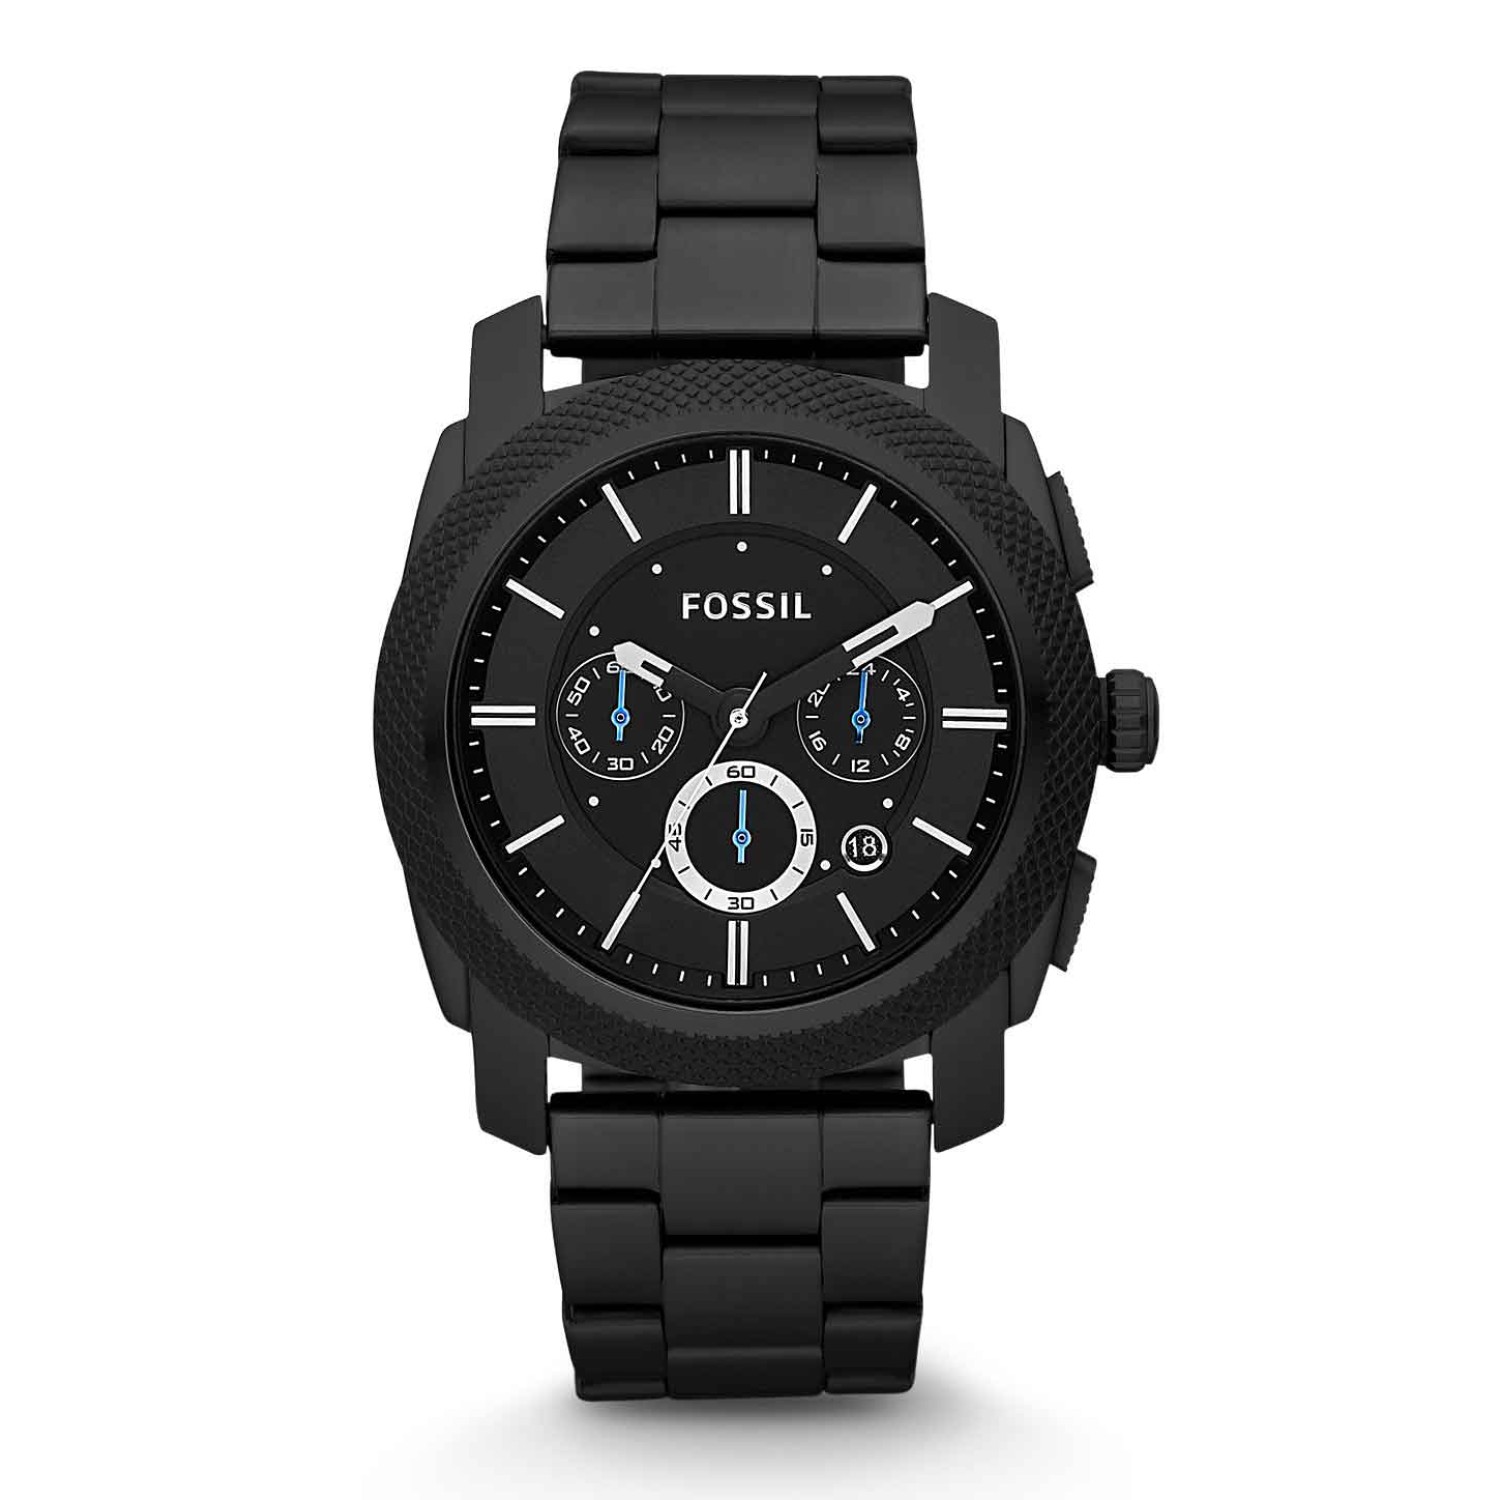 FS4552 Fossil Machine Chronograph Black Stainless Steel Watch. This monochromatic watch is the perfect neutral to transition from work to weekend. In brushed black, ion-plated stainless steel and matching dark dial, the classic timepiece features a textur